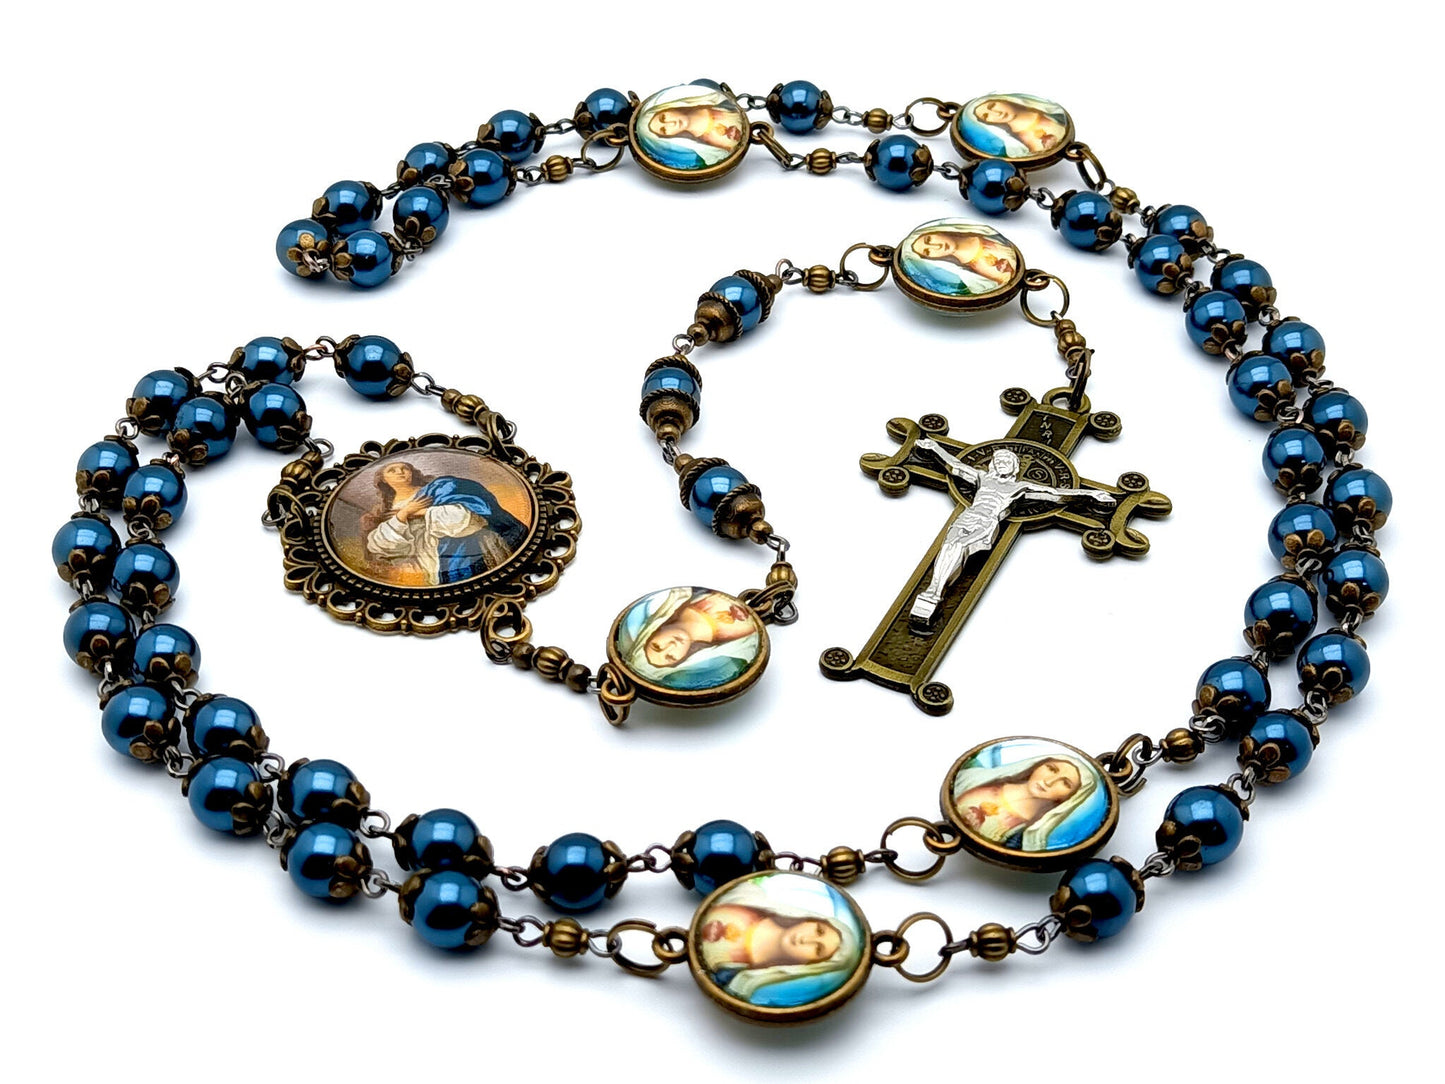 The Annunciation of Mary unique rosary beads pearlised glass vintage style rosary beads with brass and silver Saint Benedict crucifix.